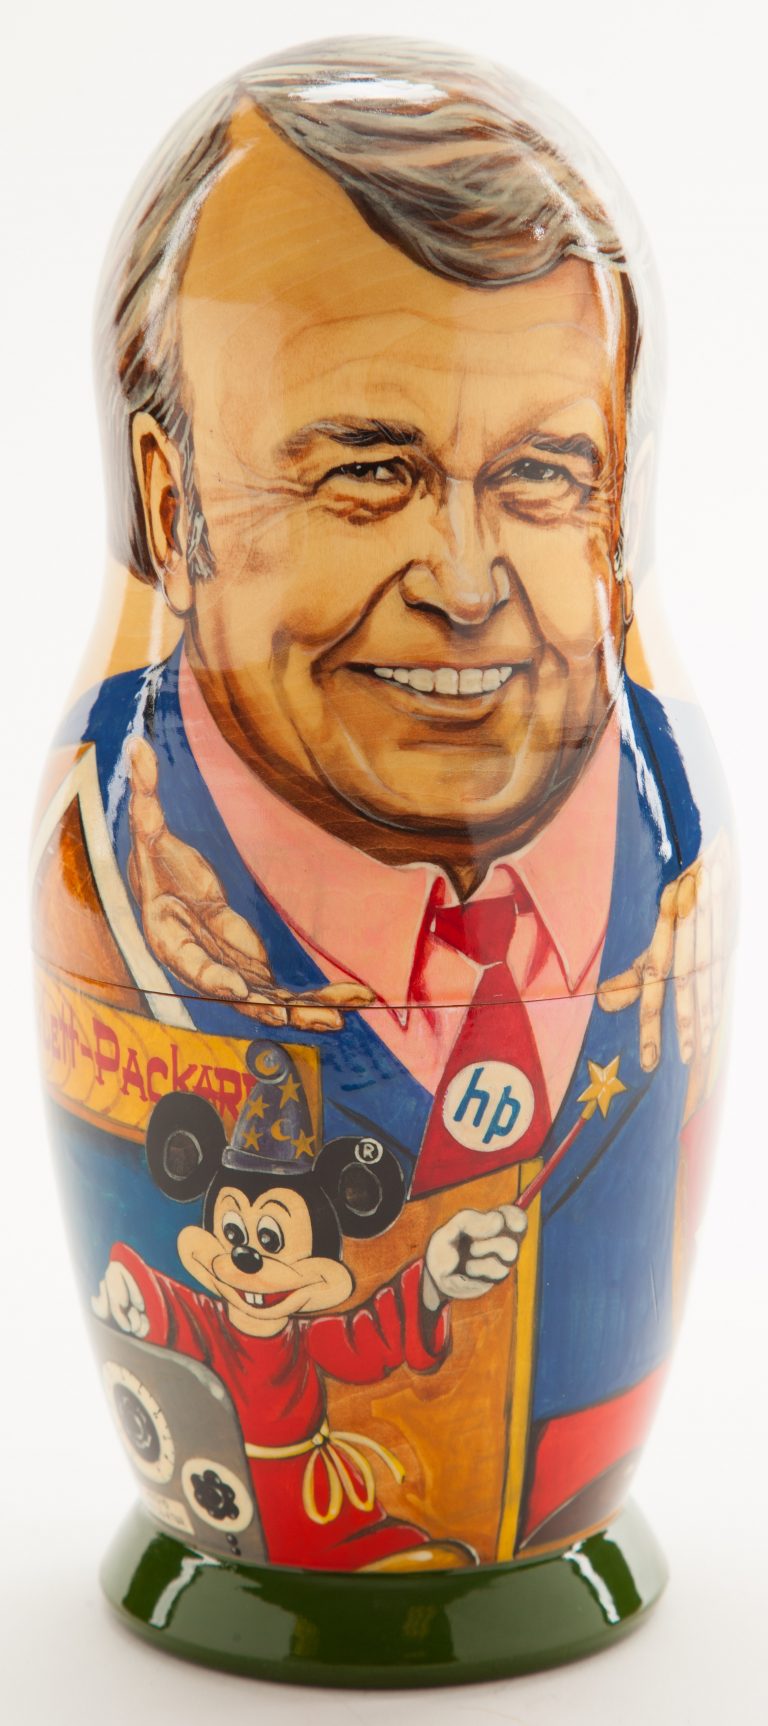 Matryoshka doll depicting Dave Packard on one side and Bill Hewlett on the other, showing Bill's side.